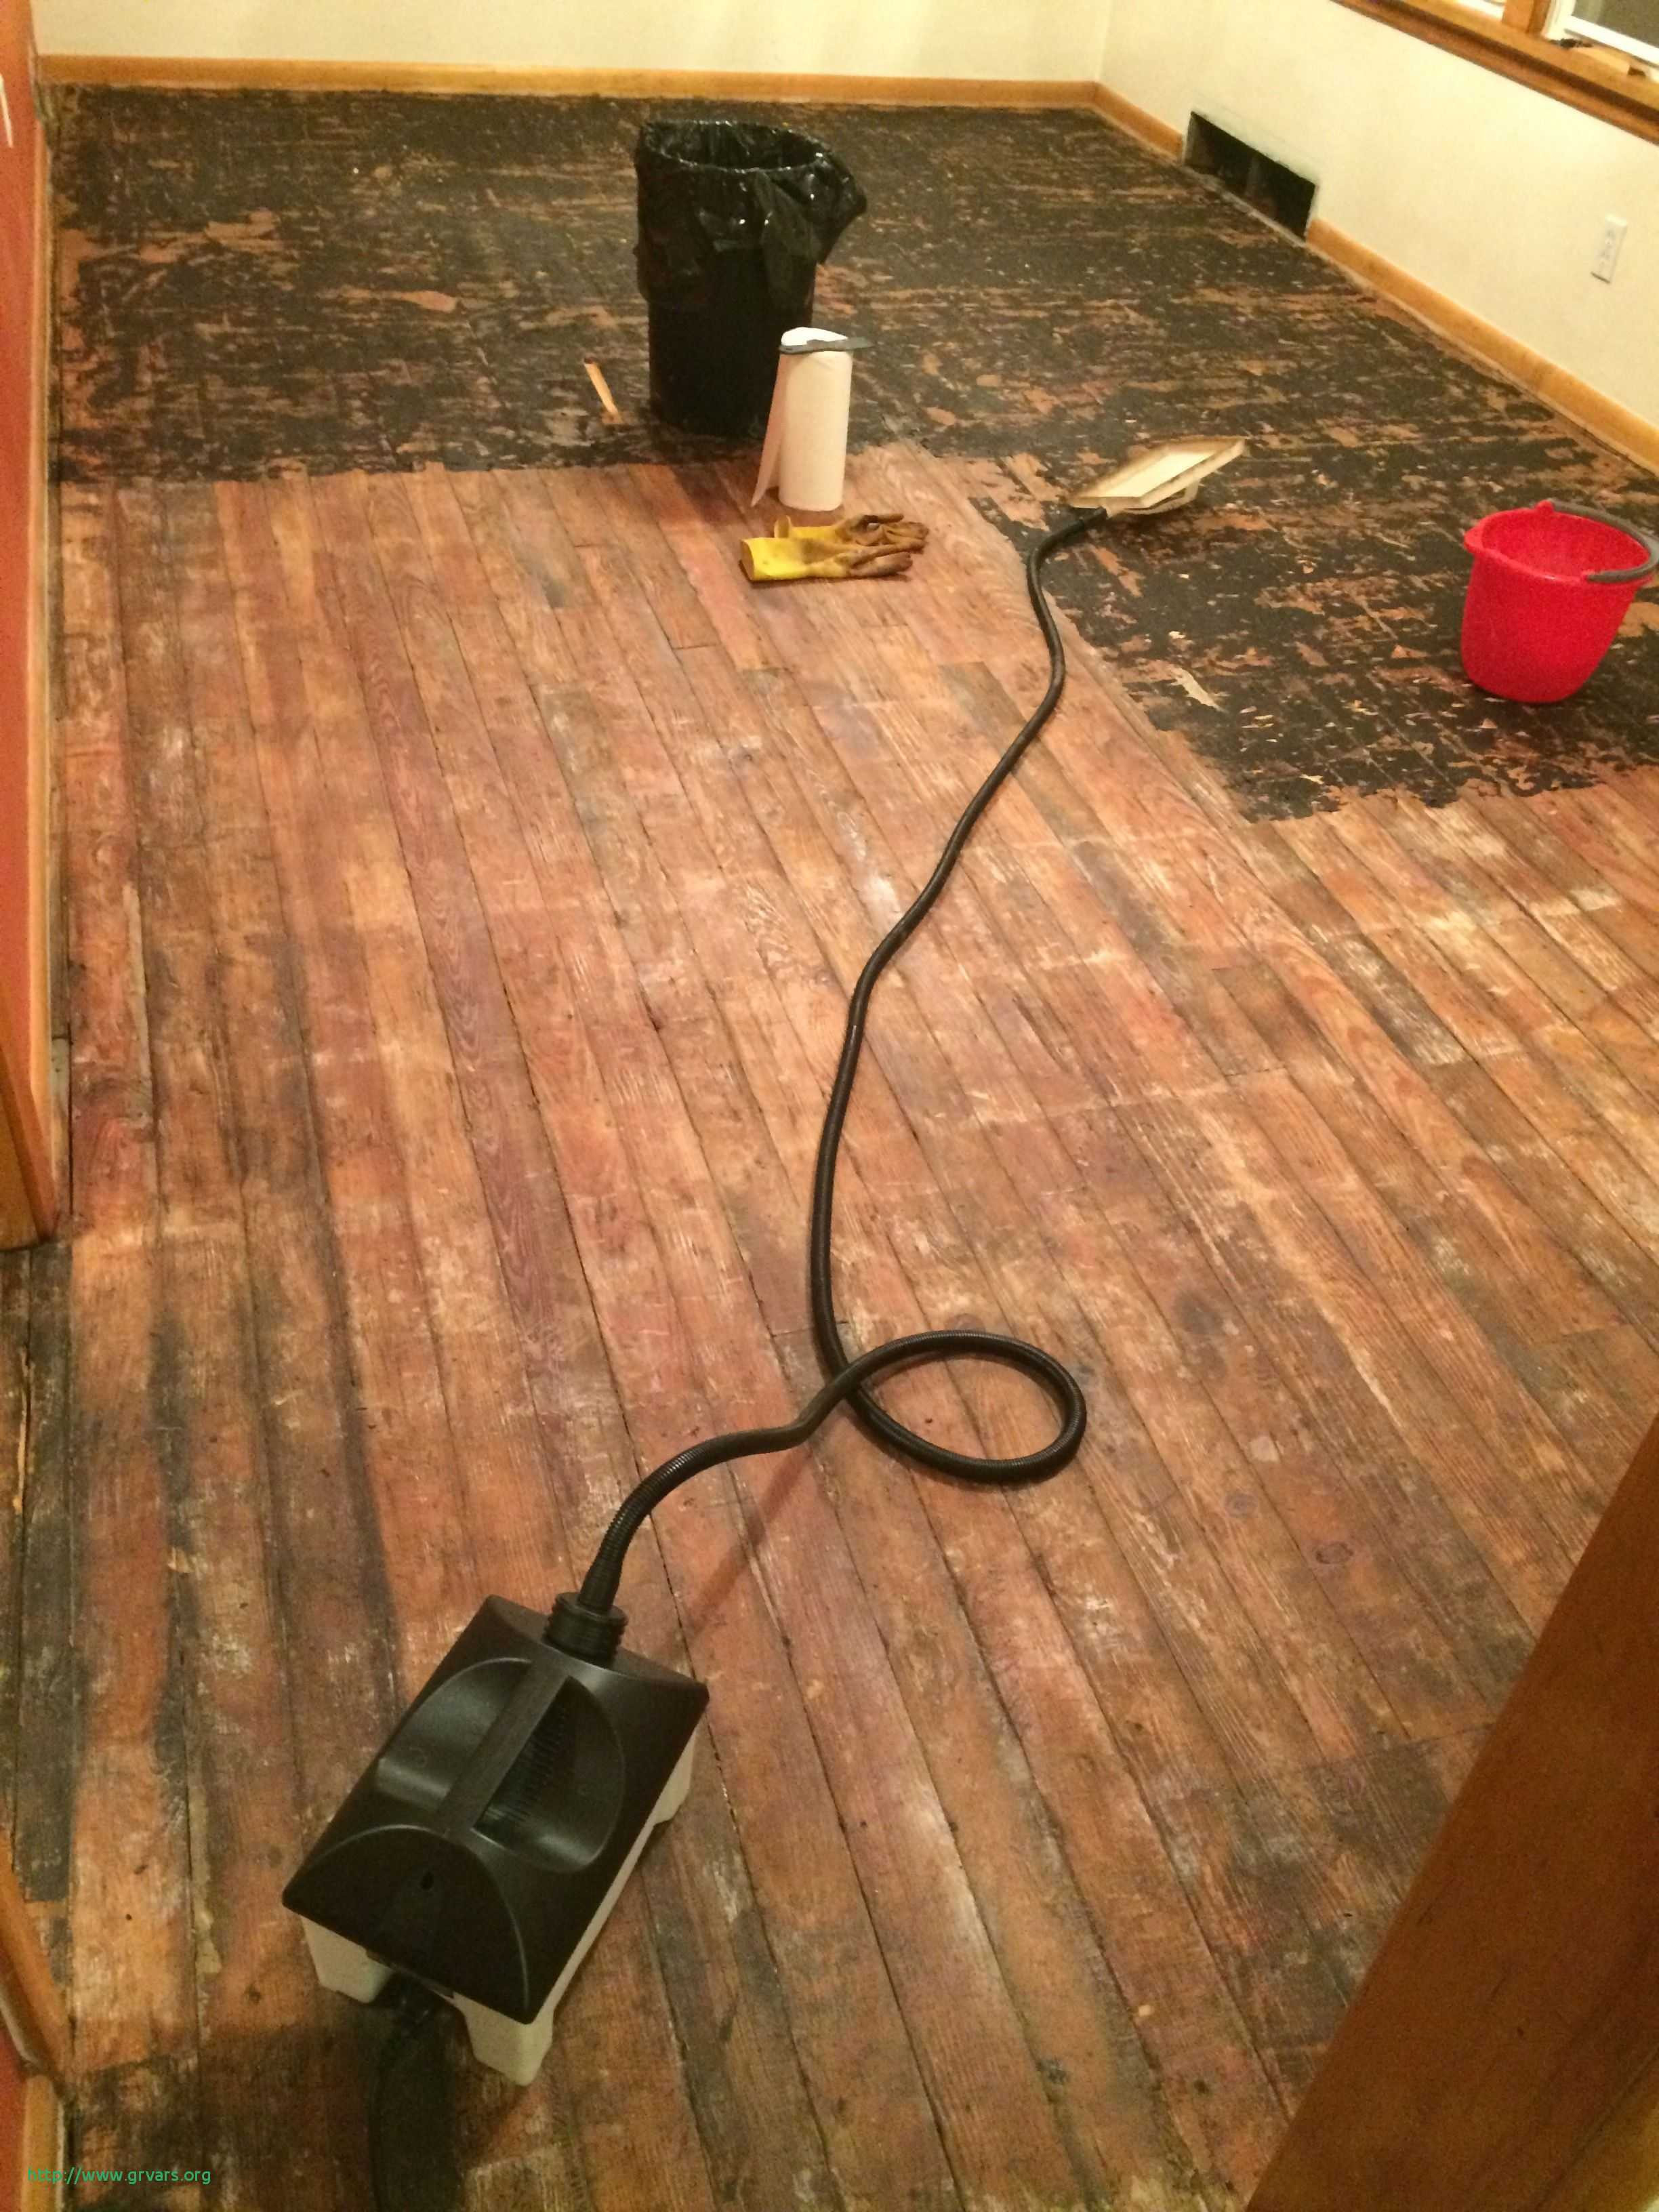 19 attractive Glue Down Hardwood Floor 2023 free download glue down hardwood floor of 23 nouveau how to remove glued down wood flooring on concrete intended for removing glue from hardwood floors luxury removing old tar paper and glue from hardwood